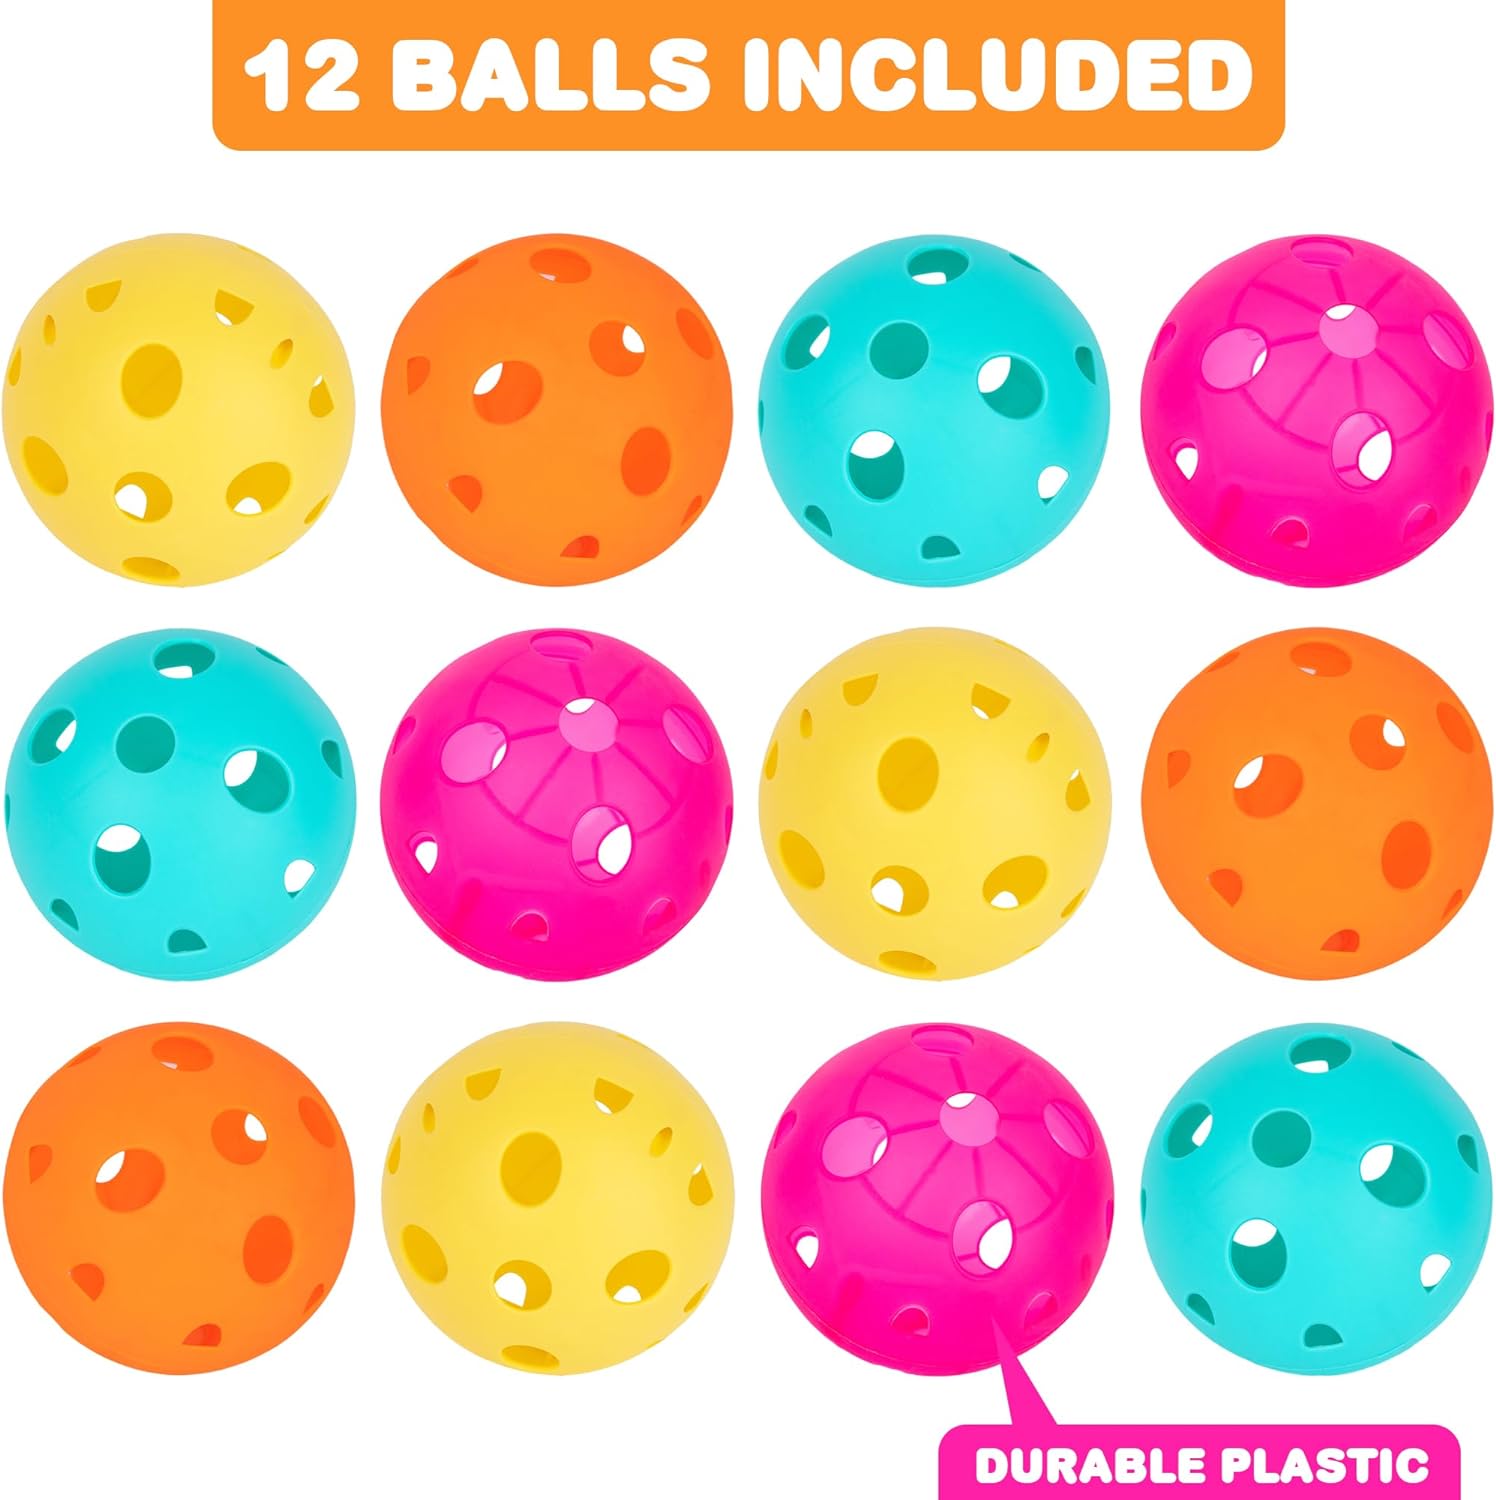 ArtCreativity Bulk Wiffle Balls (12 Pack) - Set of 12 Wiffle Ball Baseballs - Plastic Balls in 4 Vibrant Colors - Durable Design for Hours of Outdoor Fun - Main Game Sold Separately